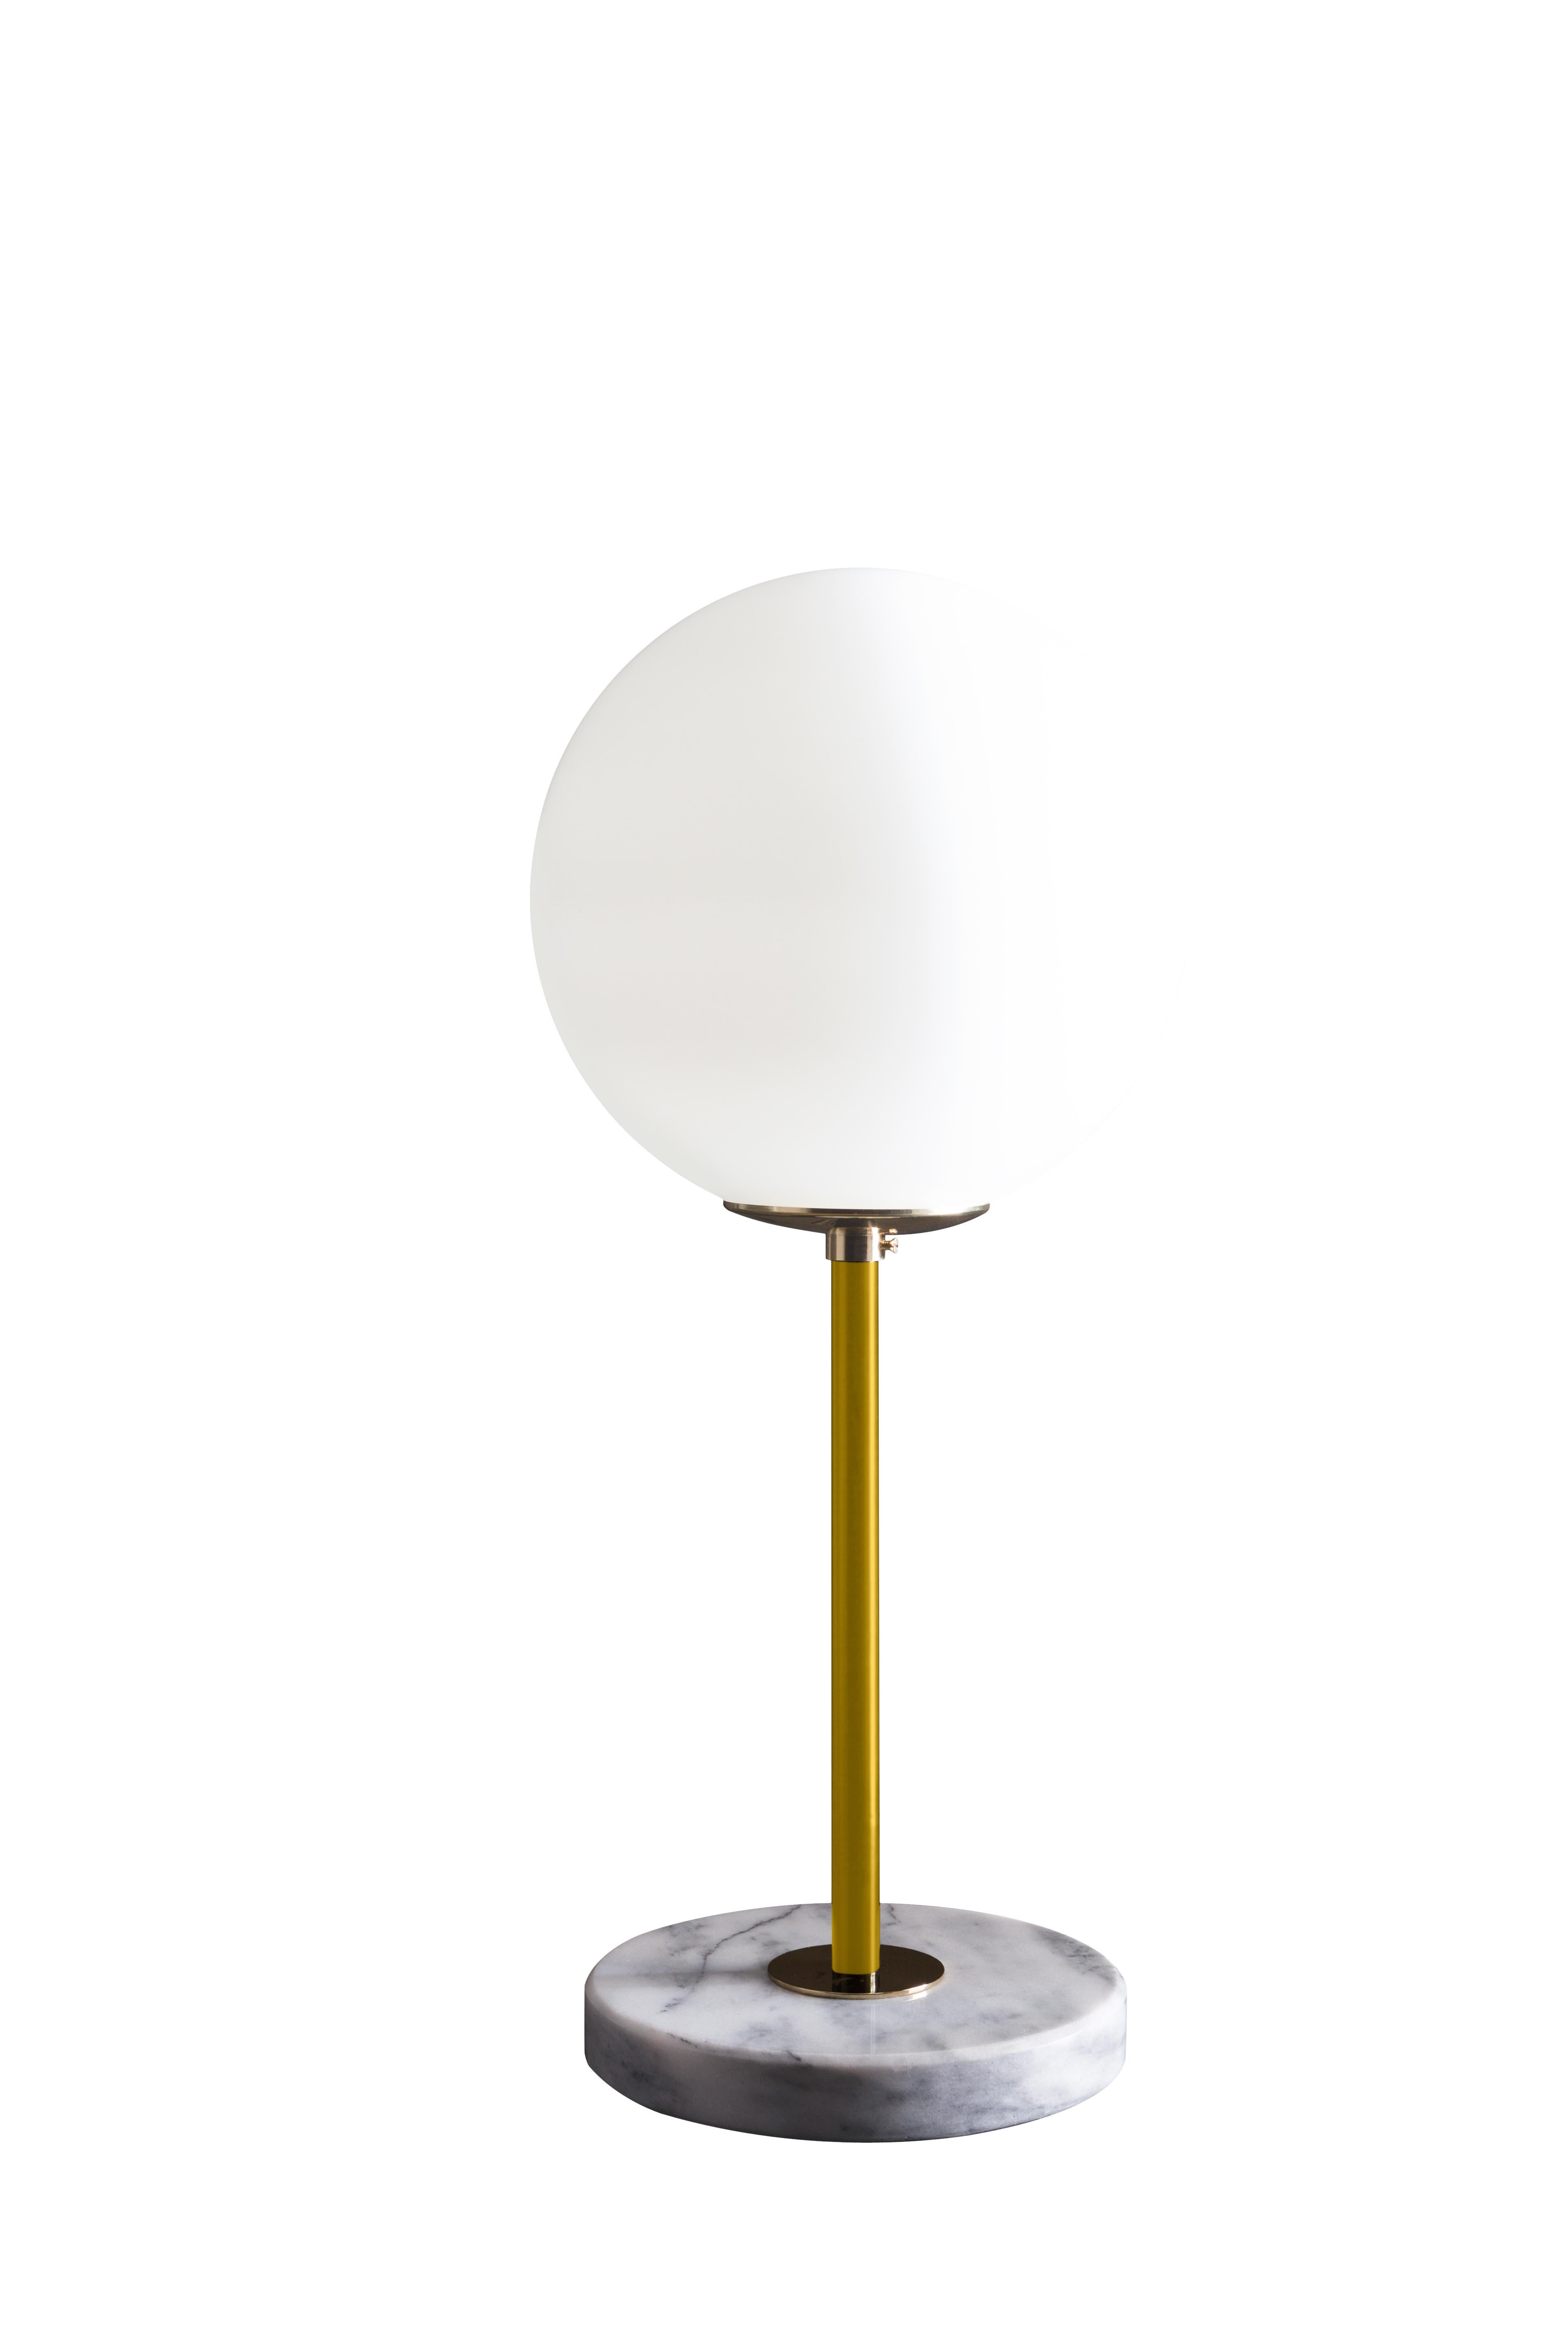 Yellow brass table lamp 06 by Magic Circus Editions
Dimensions: H 50 x W 22 cm
Materials: Smooth brass, mouth blown glass

Available finishes: Brass, nickel
Available colors (central tube): Black, green pine, red wine, mustard yellow, and